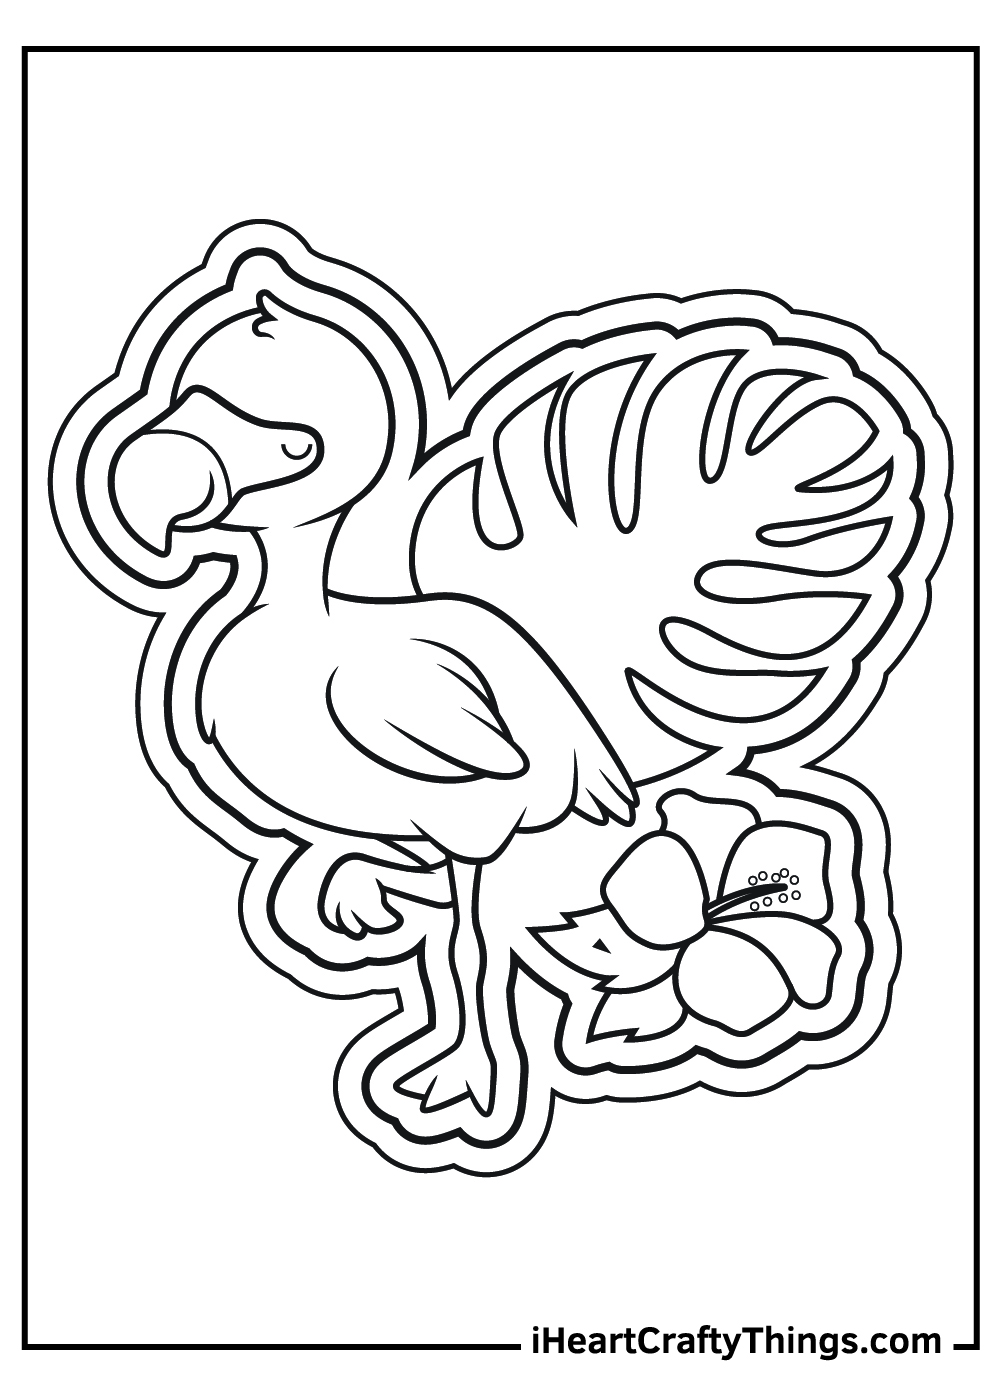 Printable Flamingos Coloring Pages Updated 20